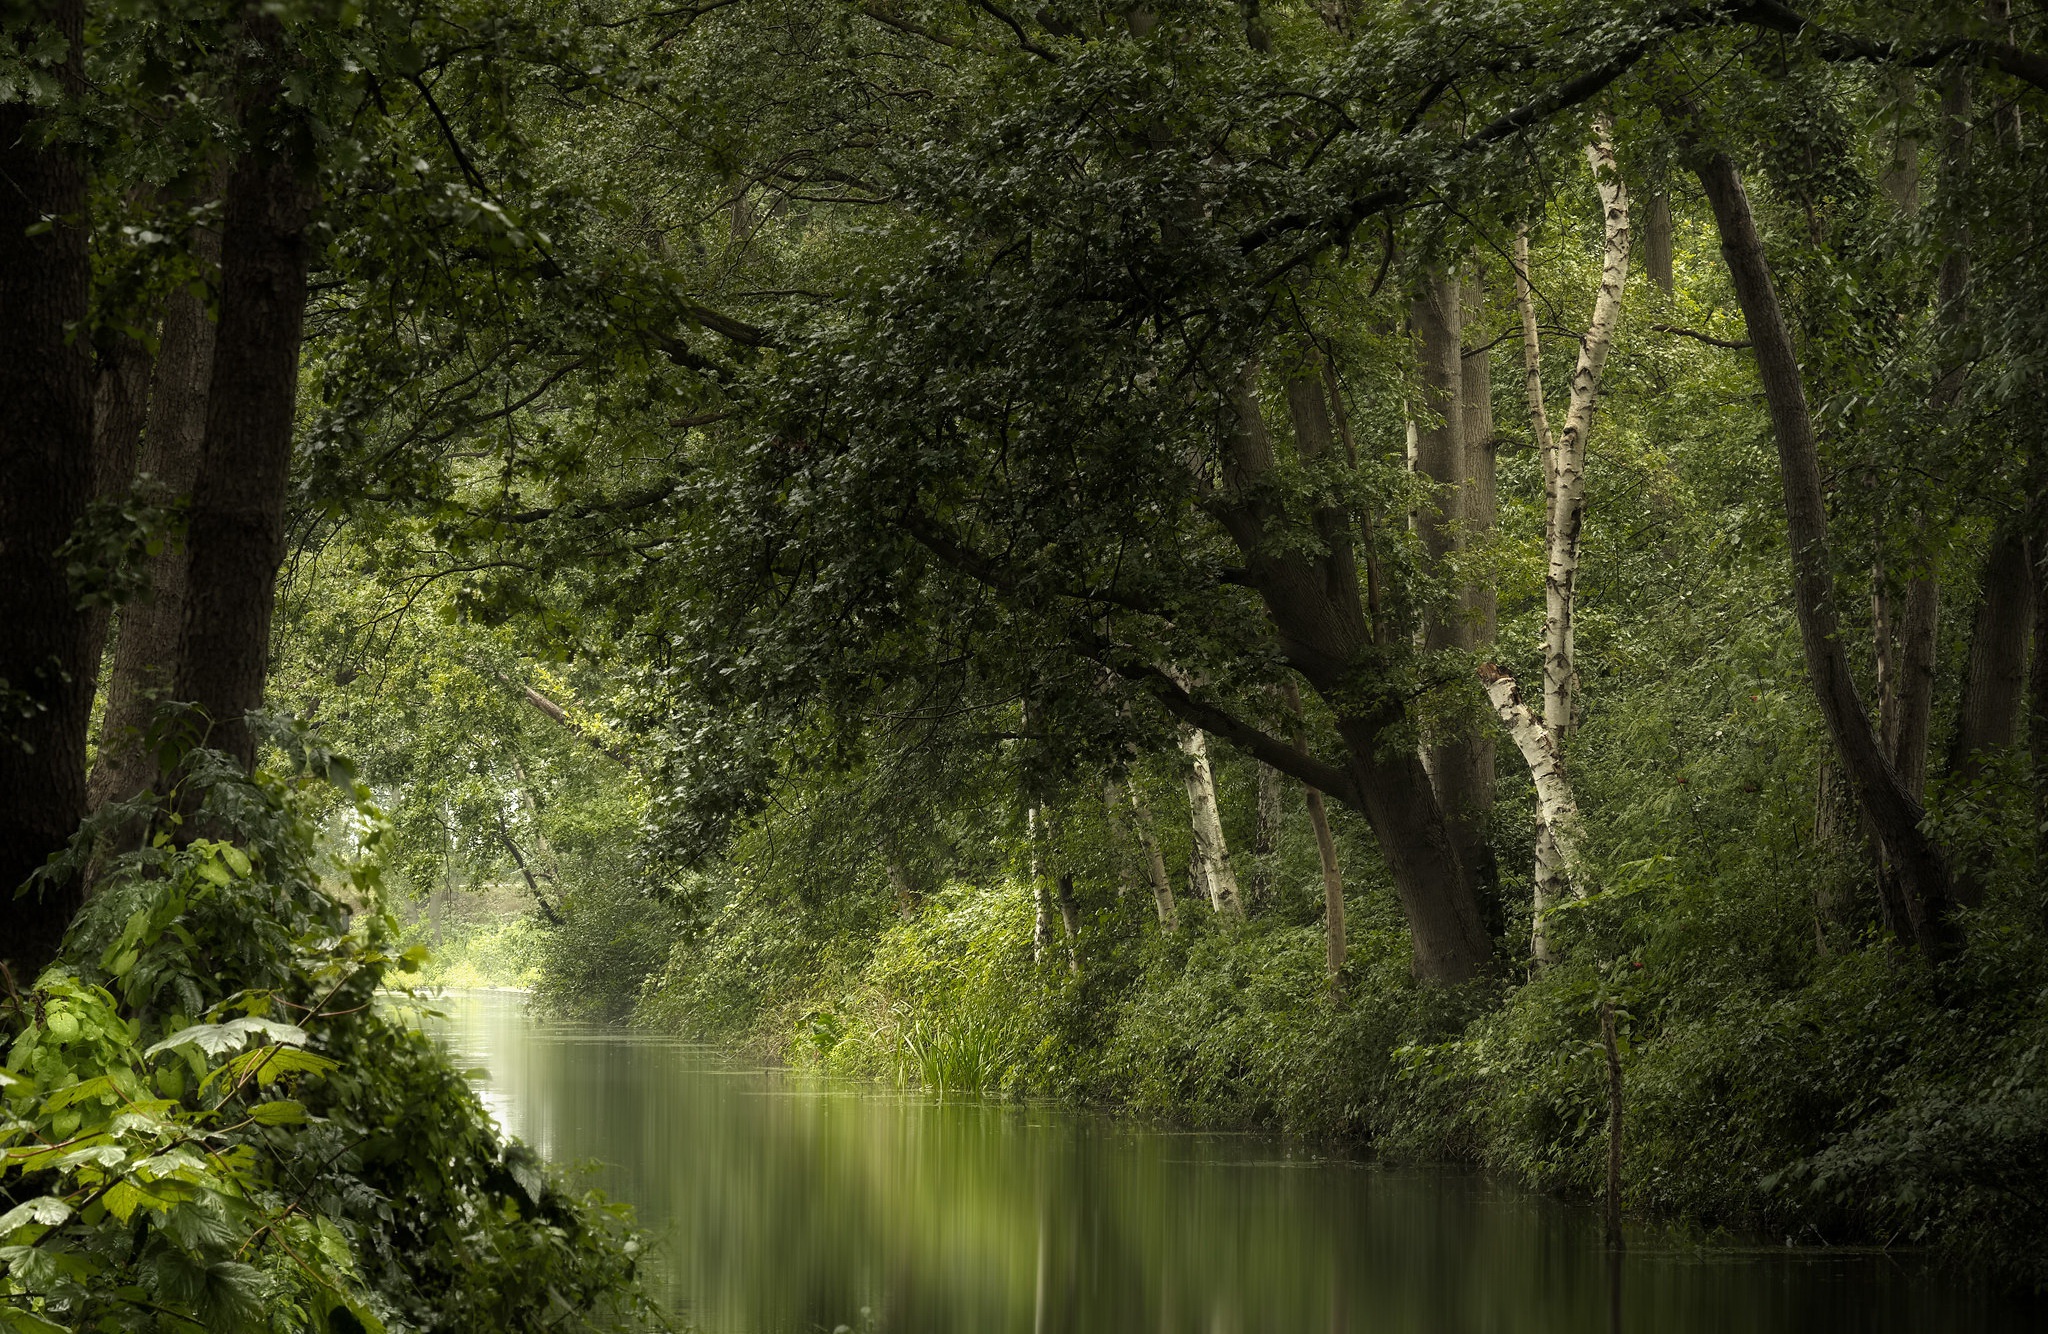 General 2048x1334 nature outdoors water river trees summer